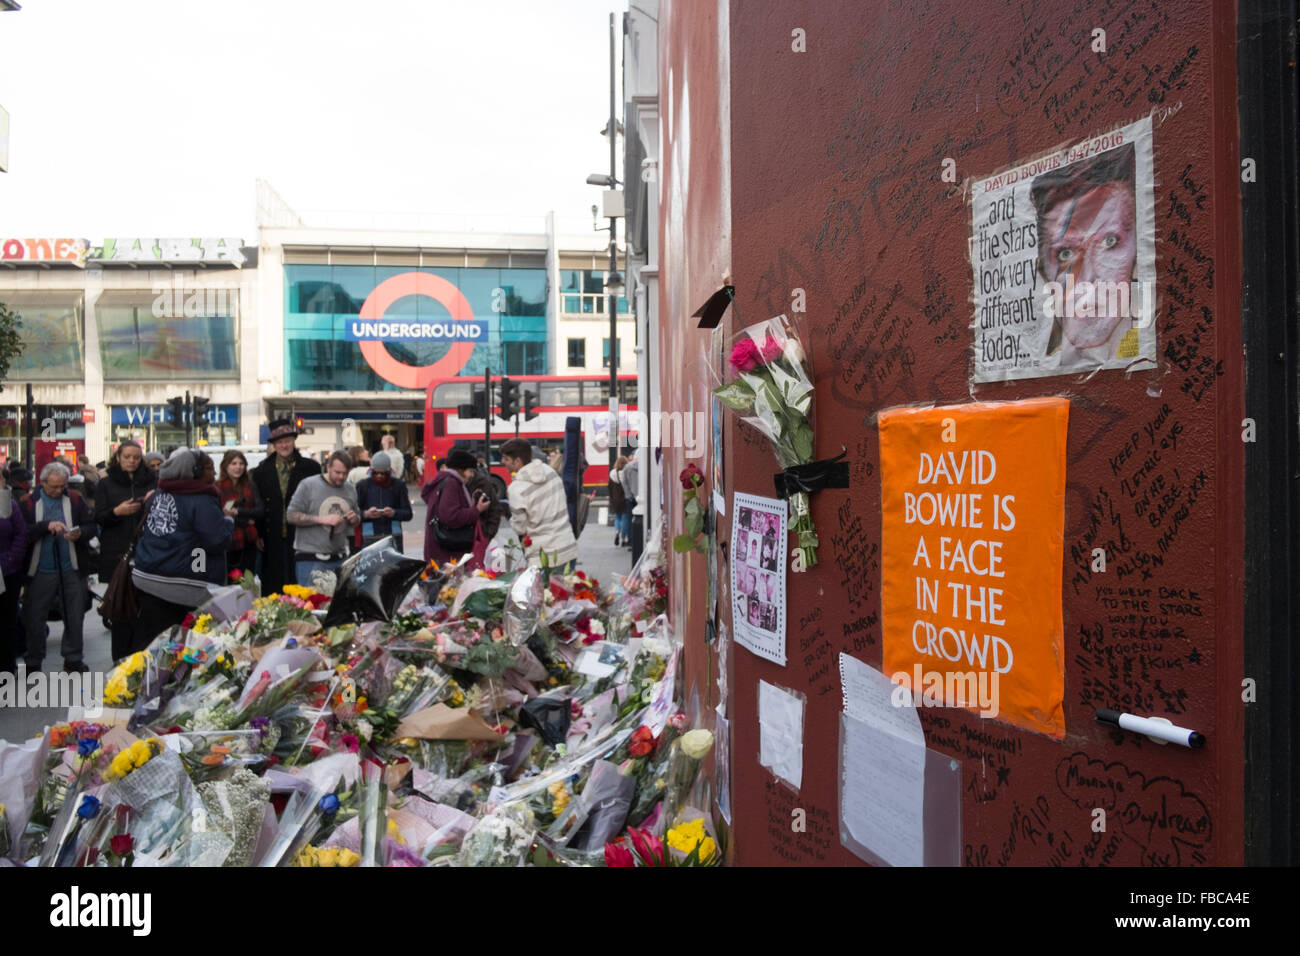 London, UK. 13th Jan, 2016.Fans pay tribute to David Bowie at a mural in Brixton where he was born. Stock Photo